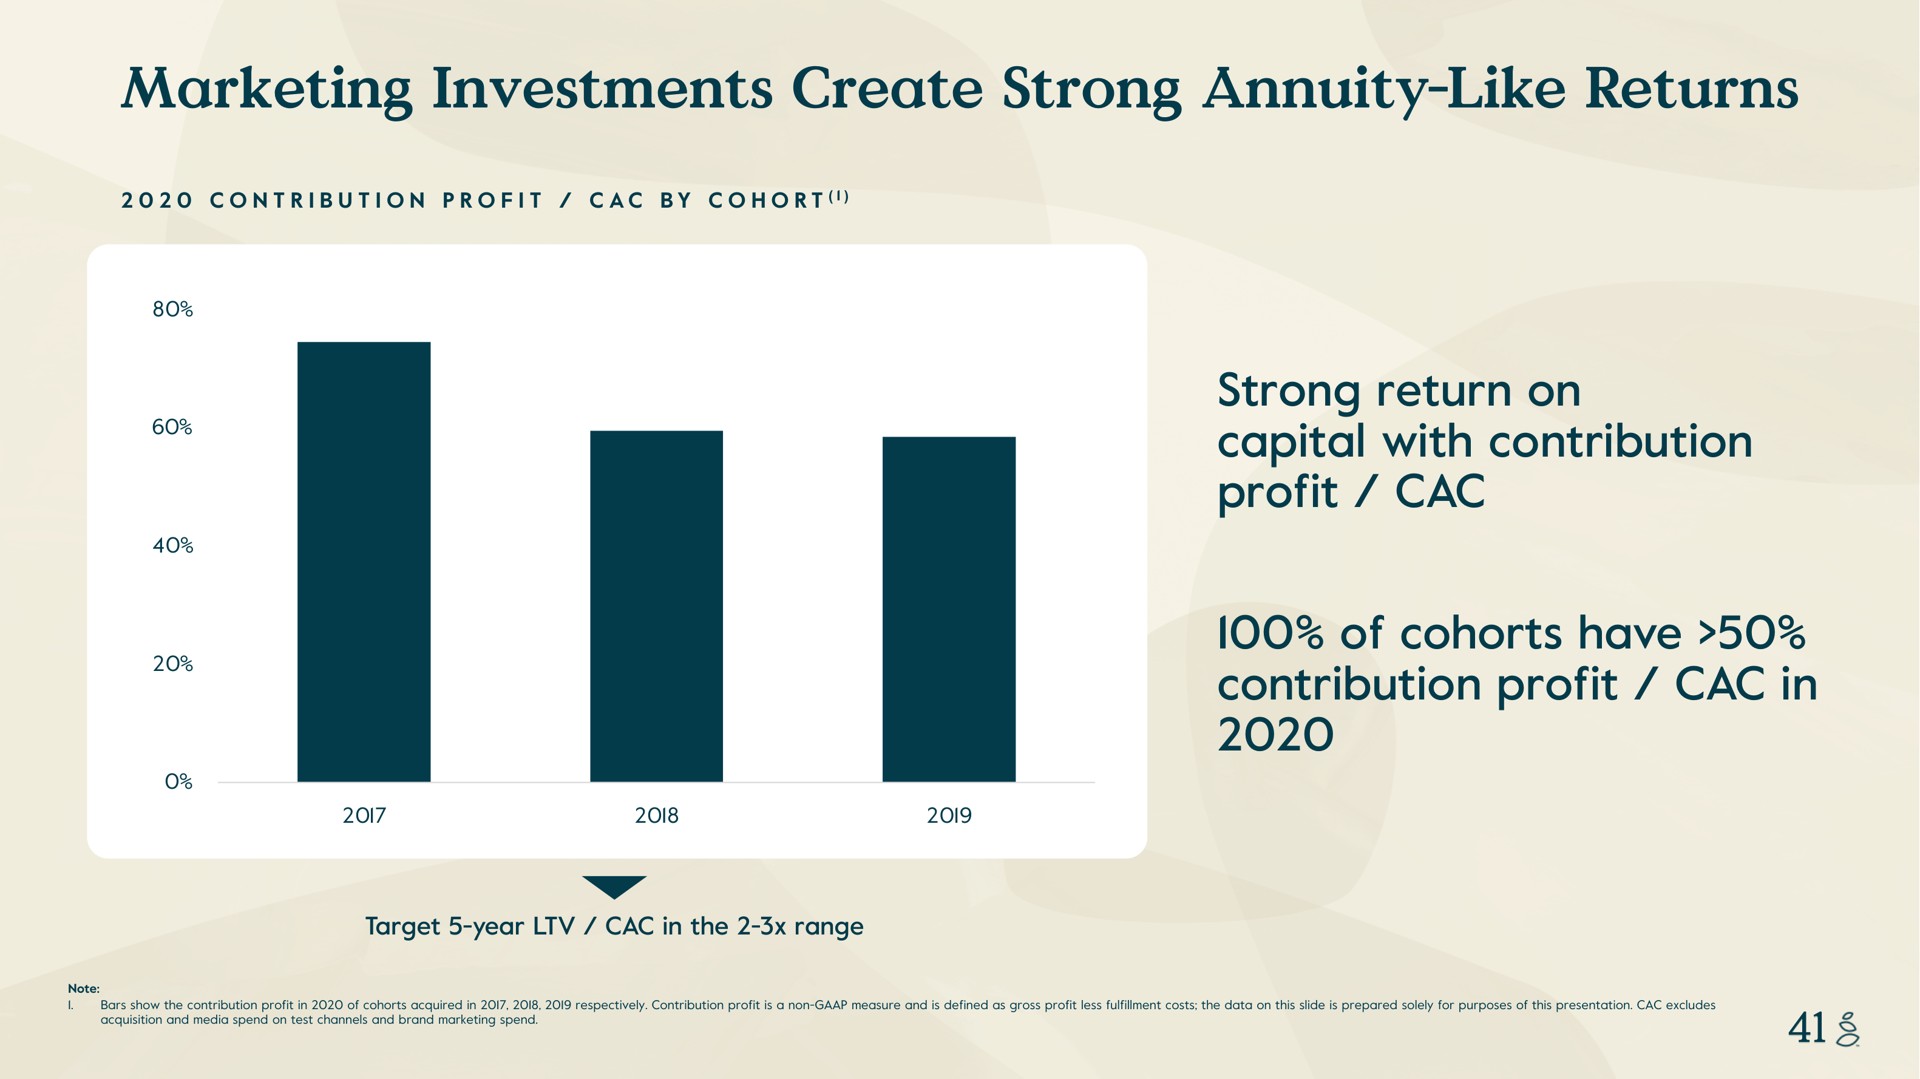 marketing investments create strong annuity like returns strong return on capital with contribution profit of cohorts have contribution profit in by cohort son loo target year the range note i bars show the acquired respectively is a non measure and is defined as gross less fulfillment costs the data this slide is prepared solely for purposes this presentation excludes acquisition media spend test channels ani brand market ting spend and | Grove